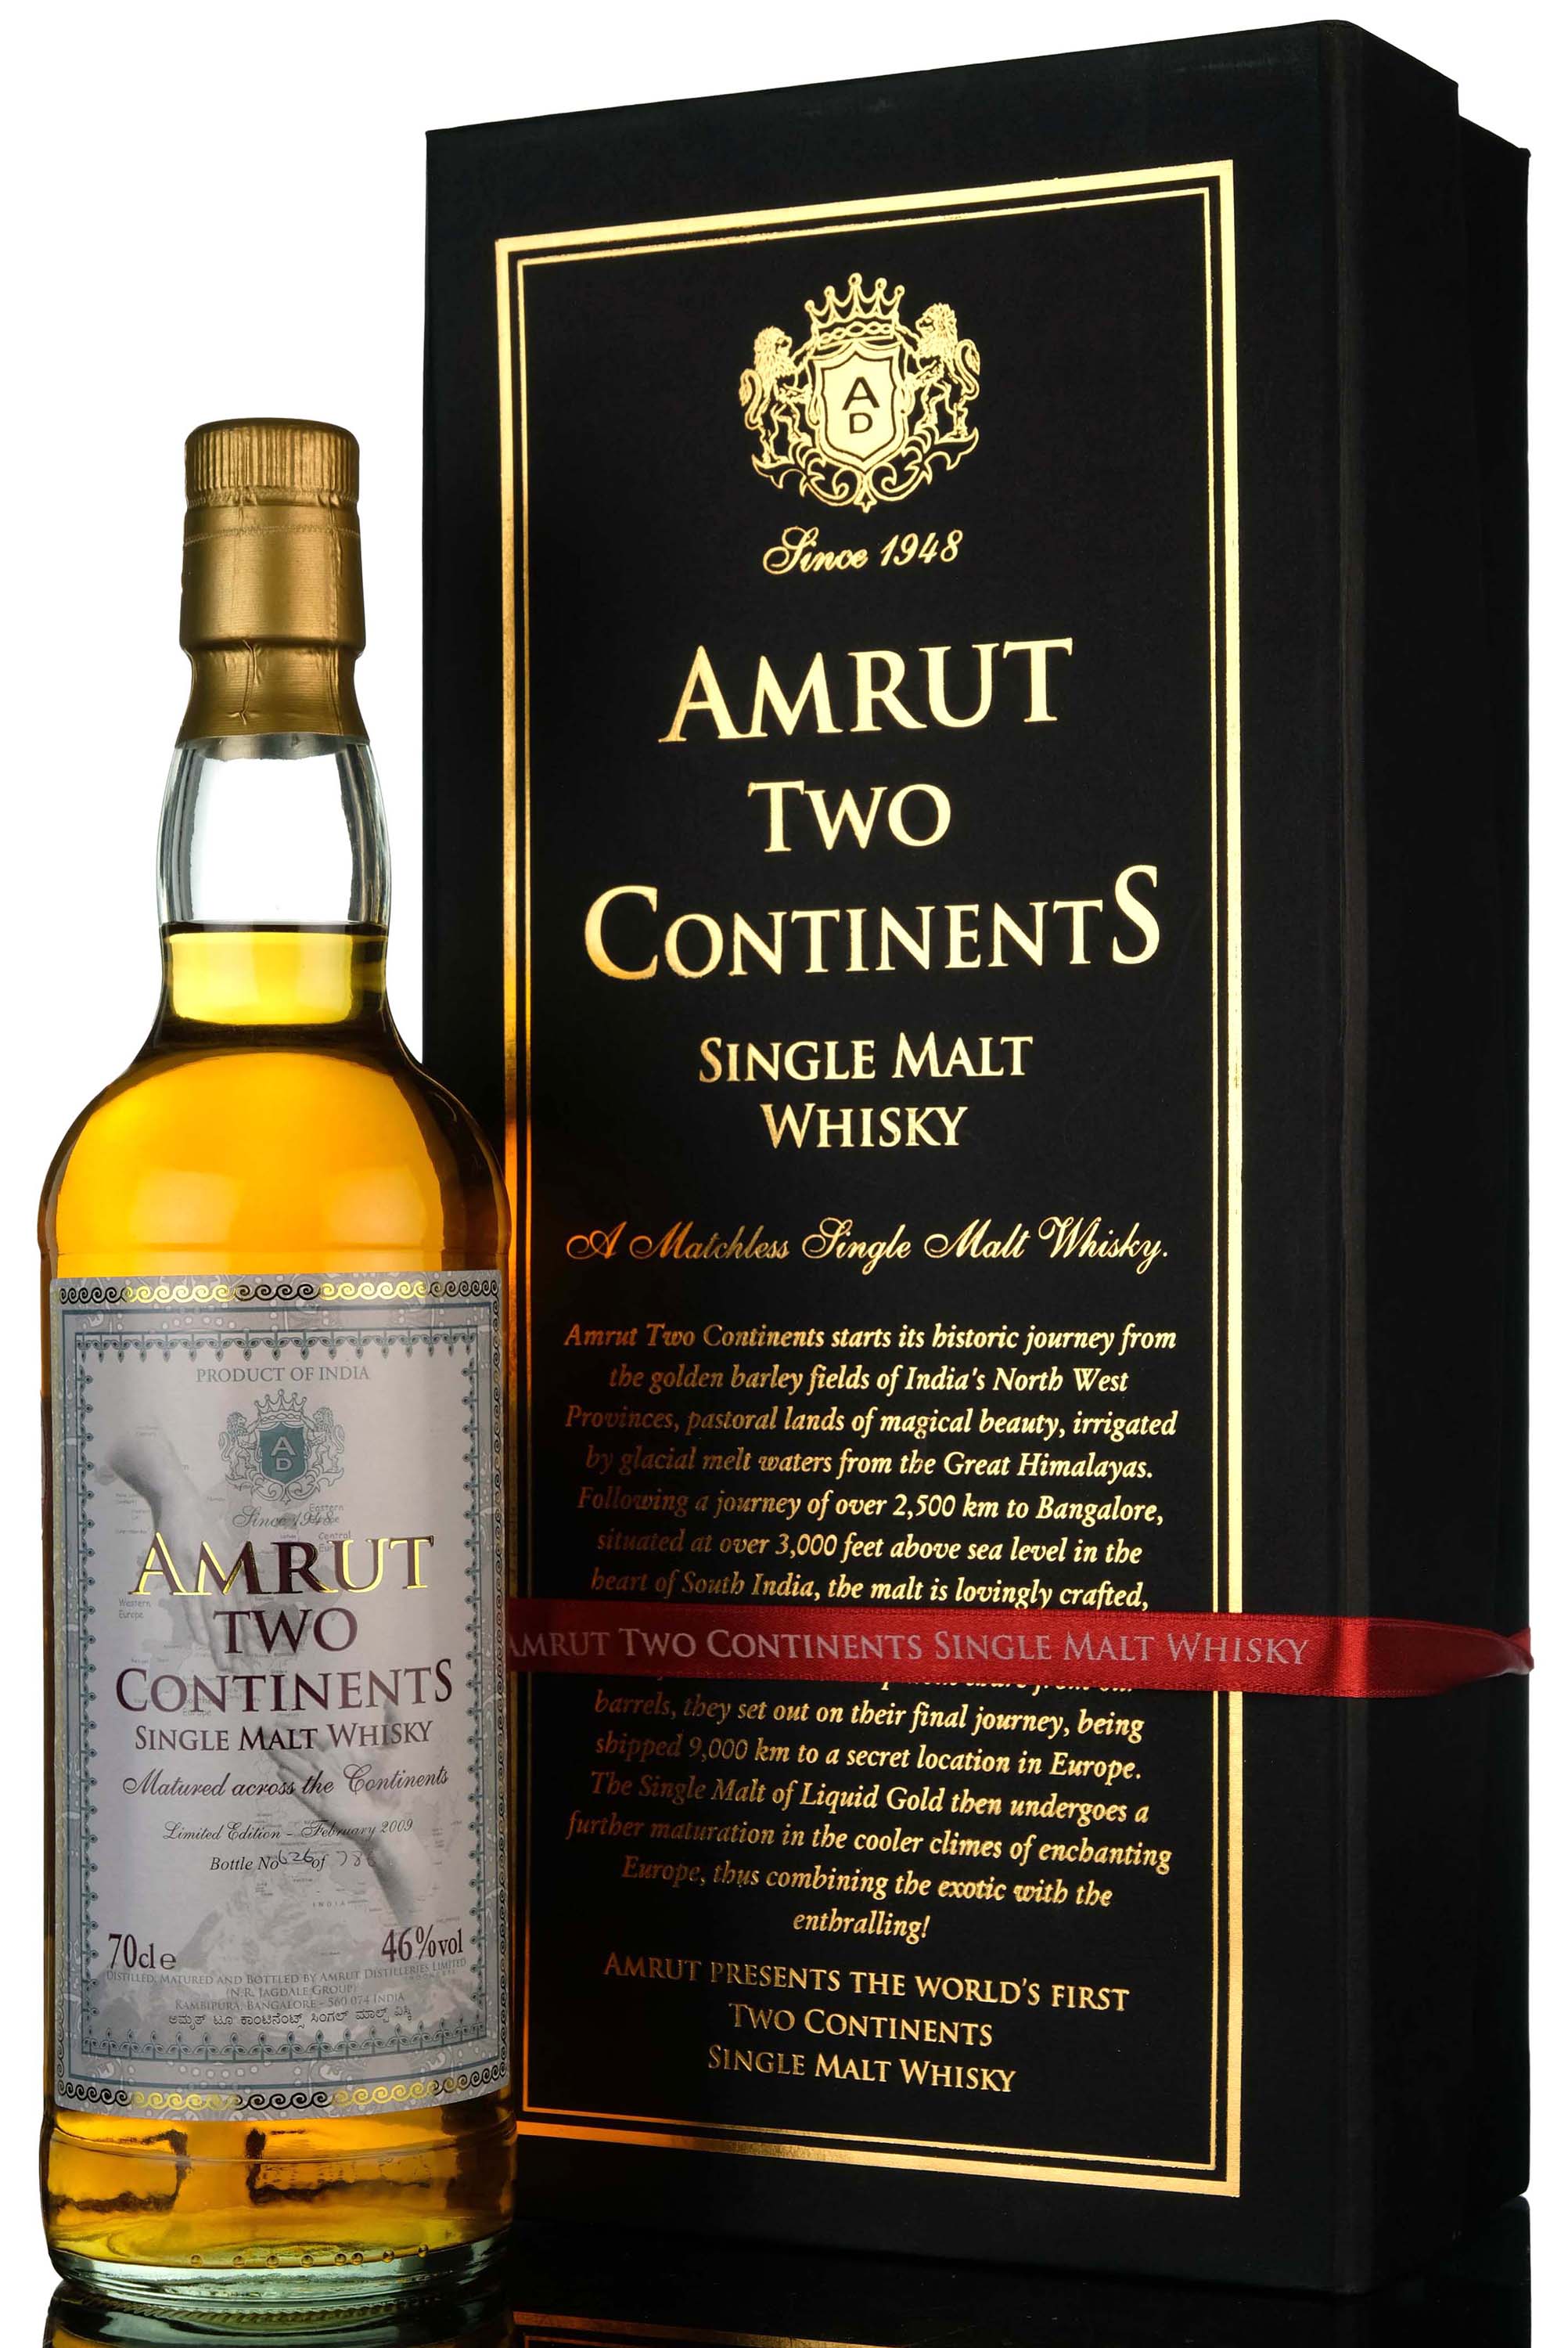 Amrut Two Continents - 1st Edition - 2009 Release